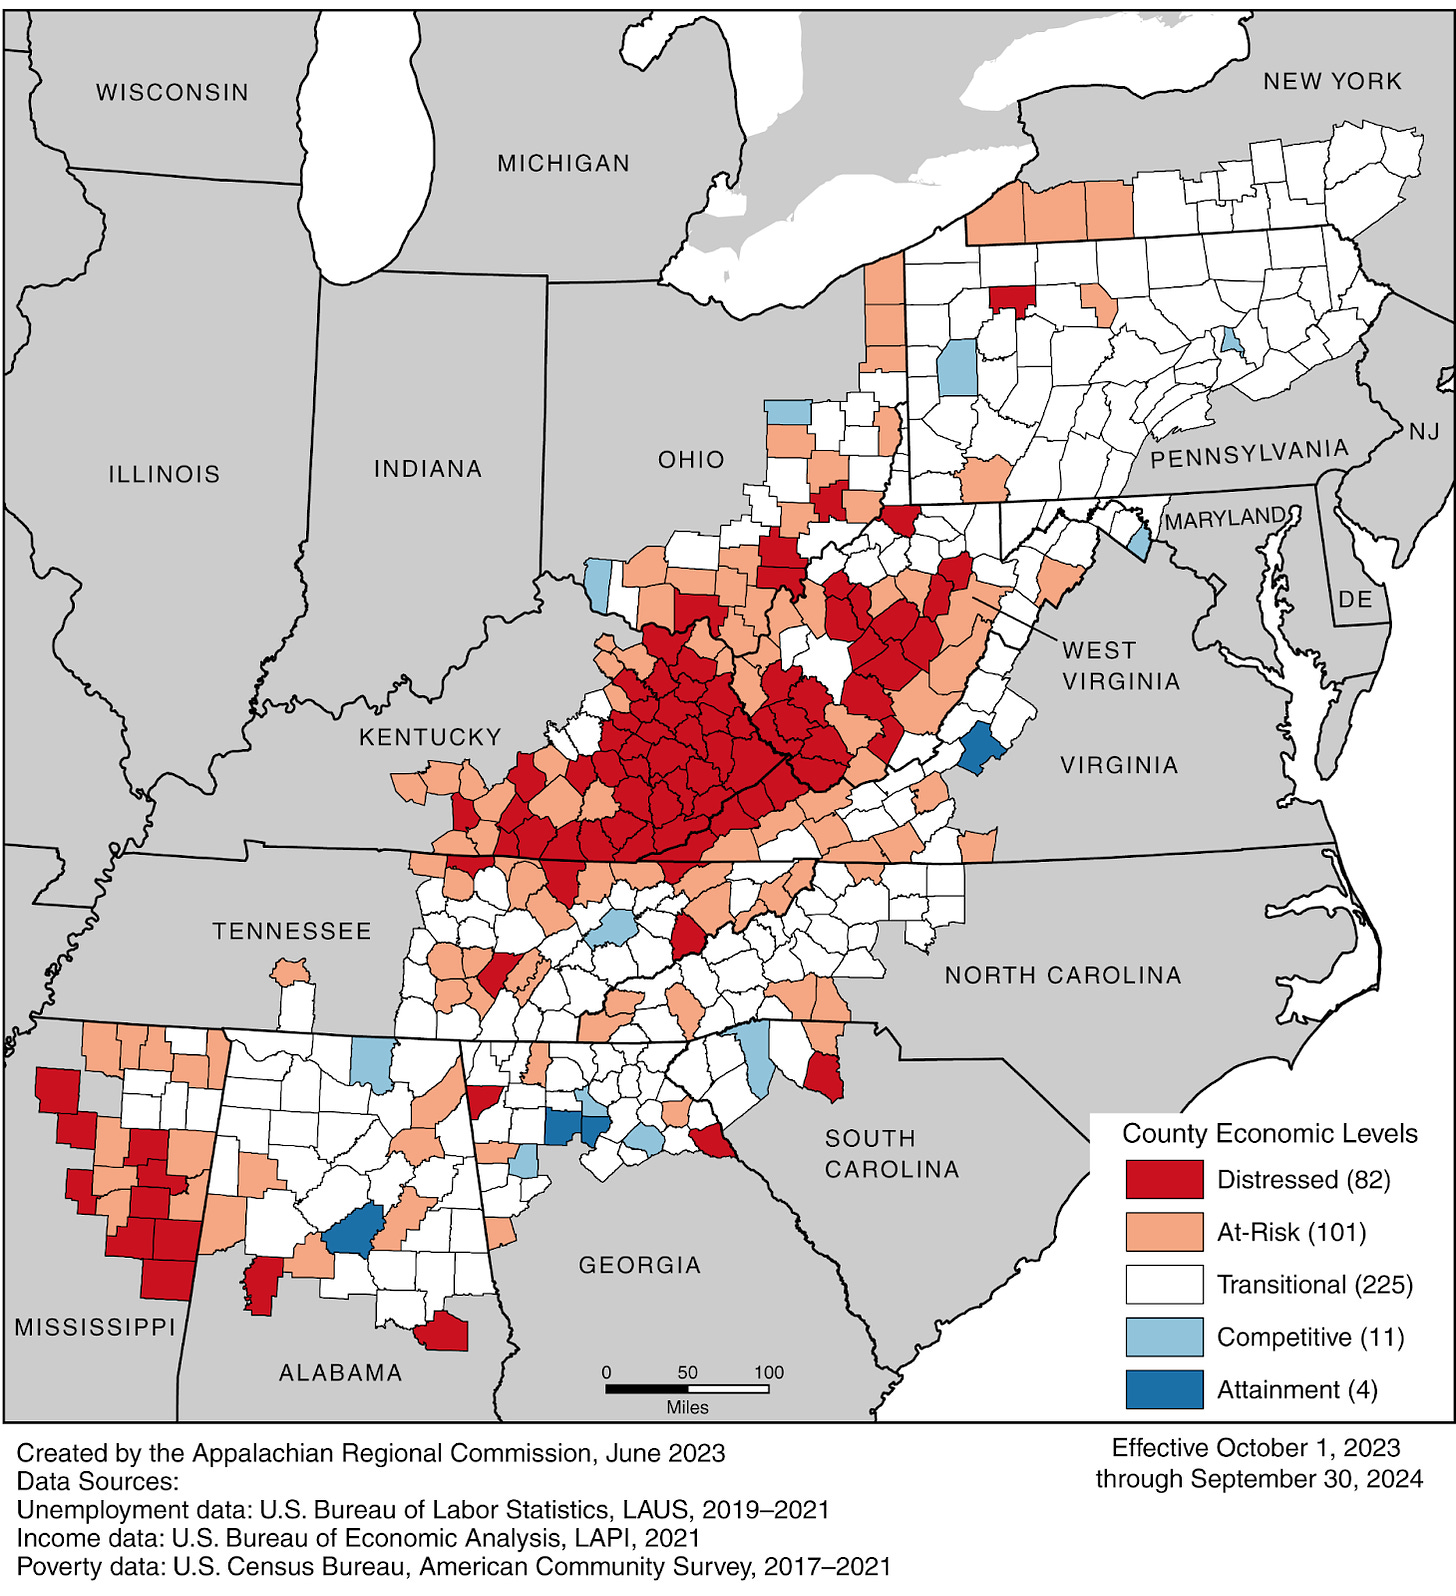 A map of Appalachia showing which counties are economically distressed.